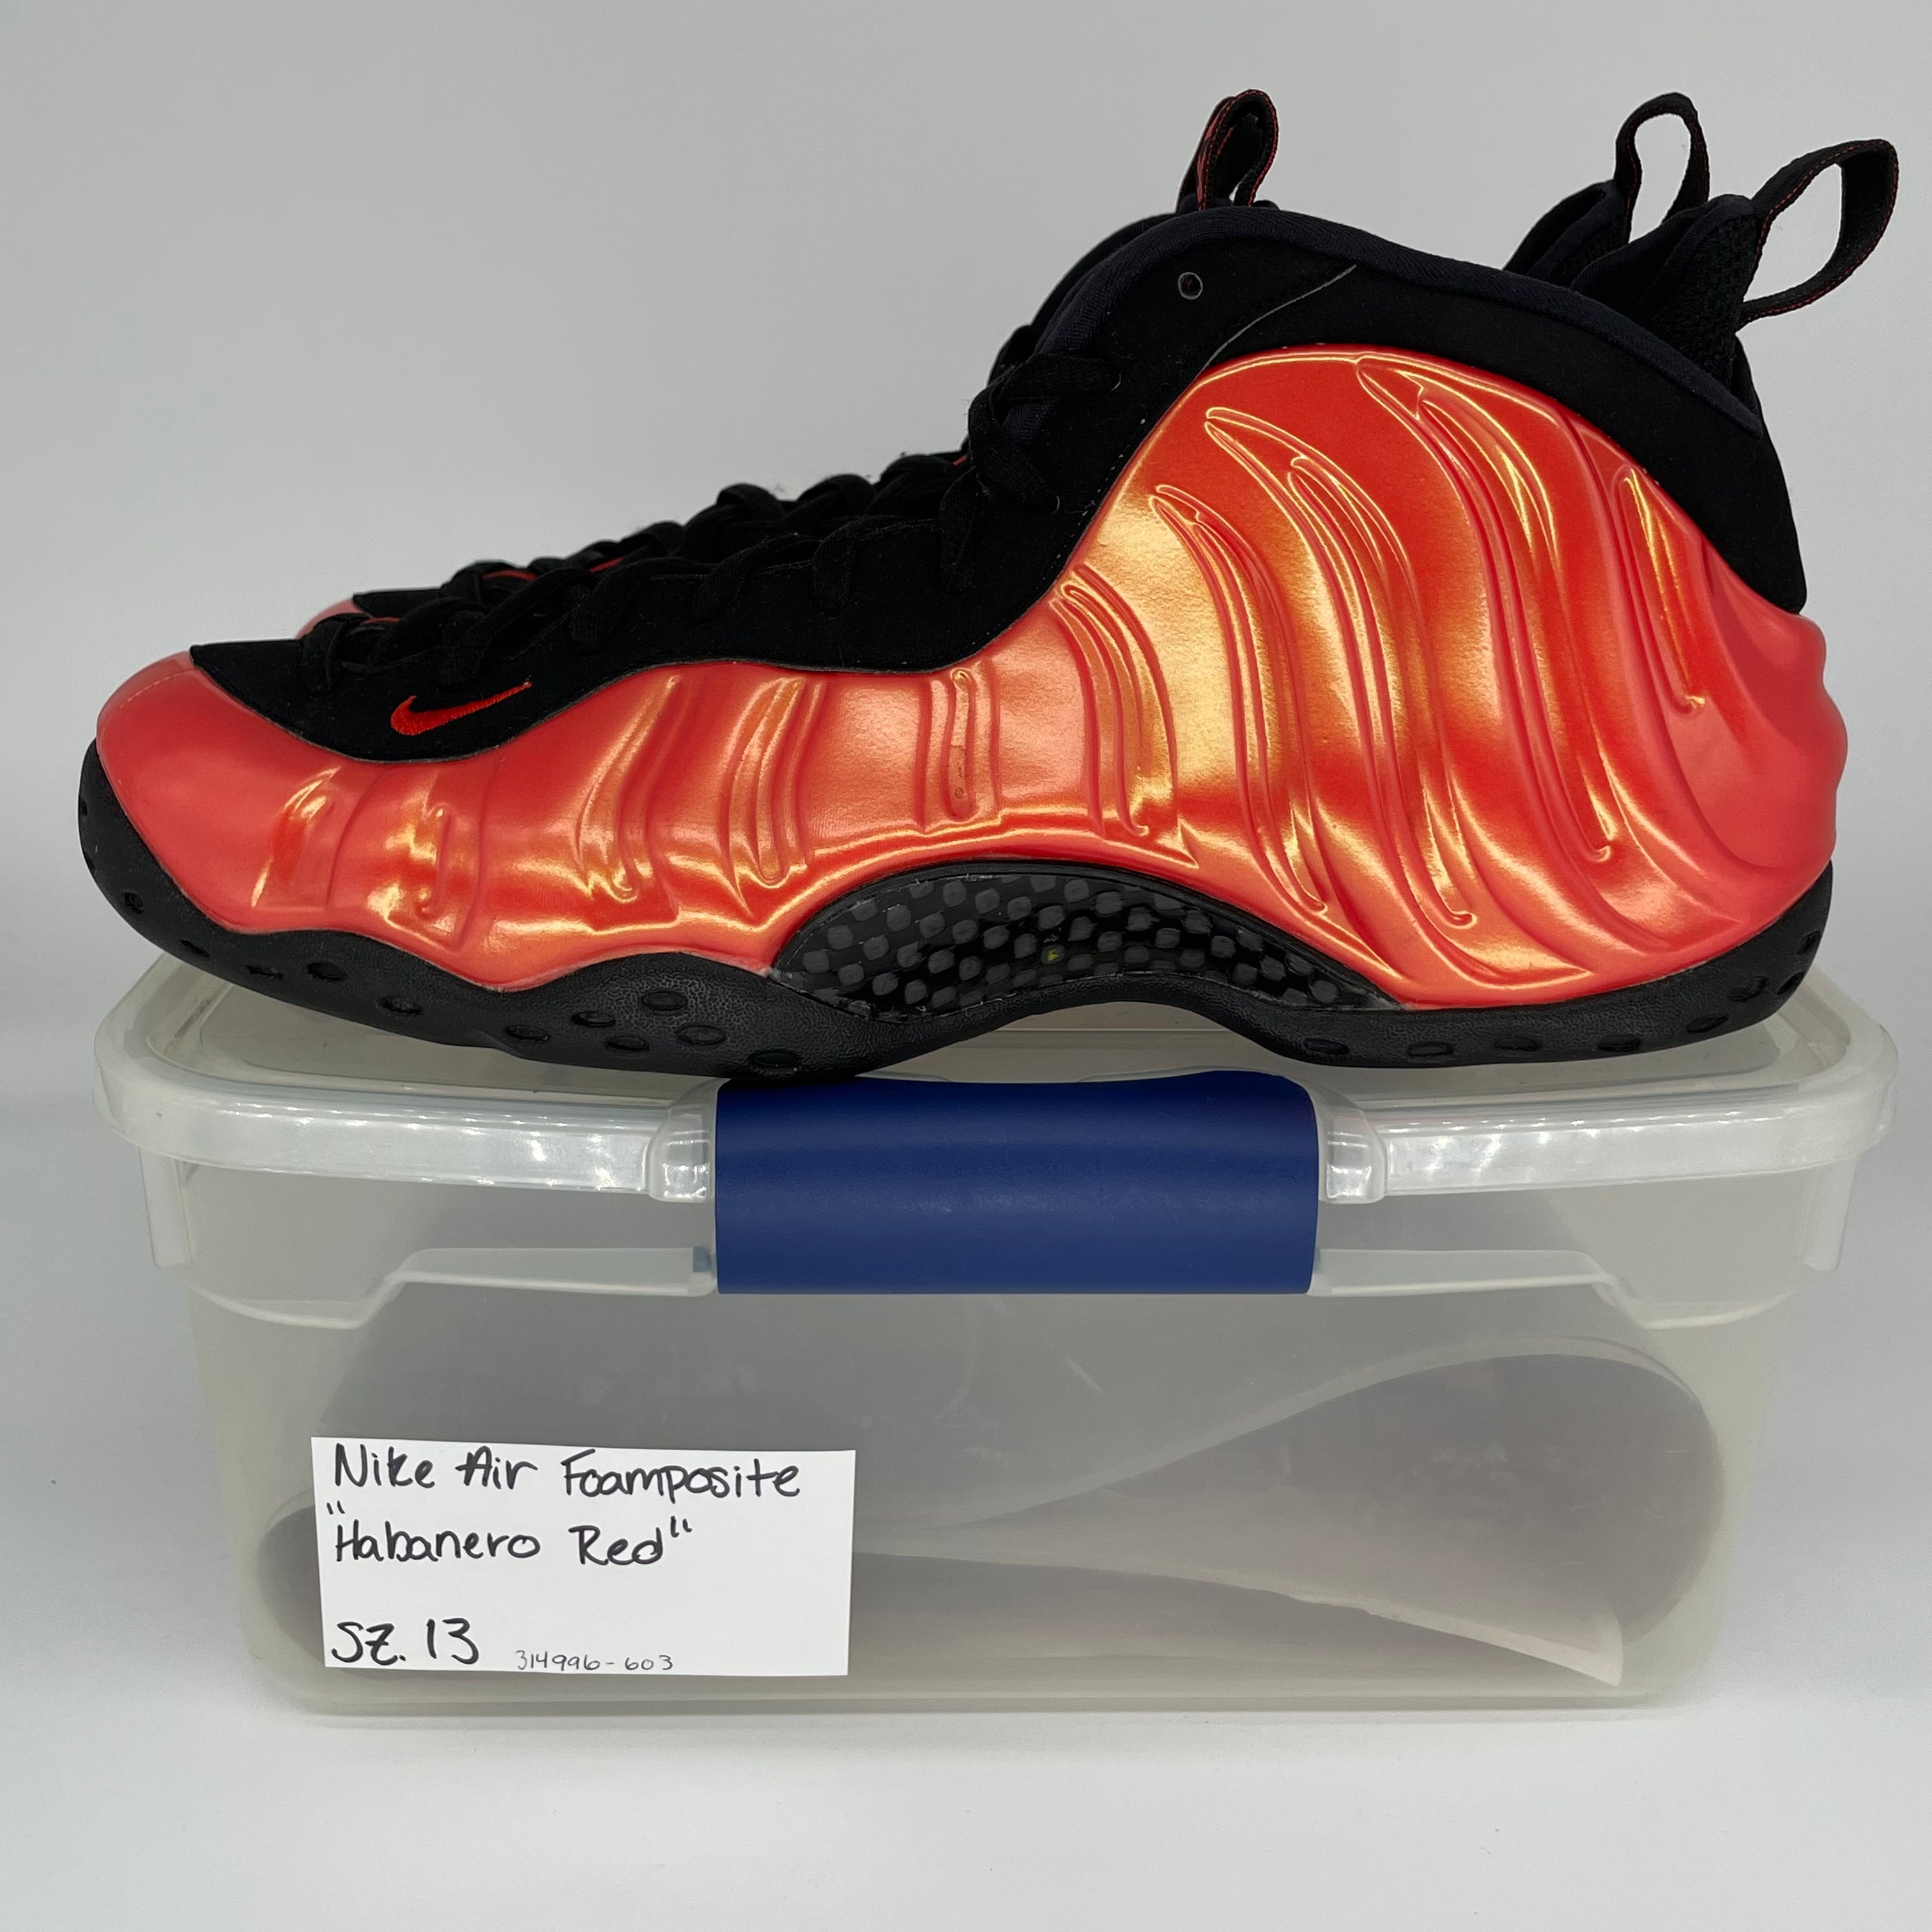 NIKE AIR FOAMPOSITE ONE HABANERO RED SIZE 13 314996-603